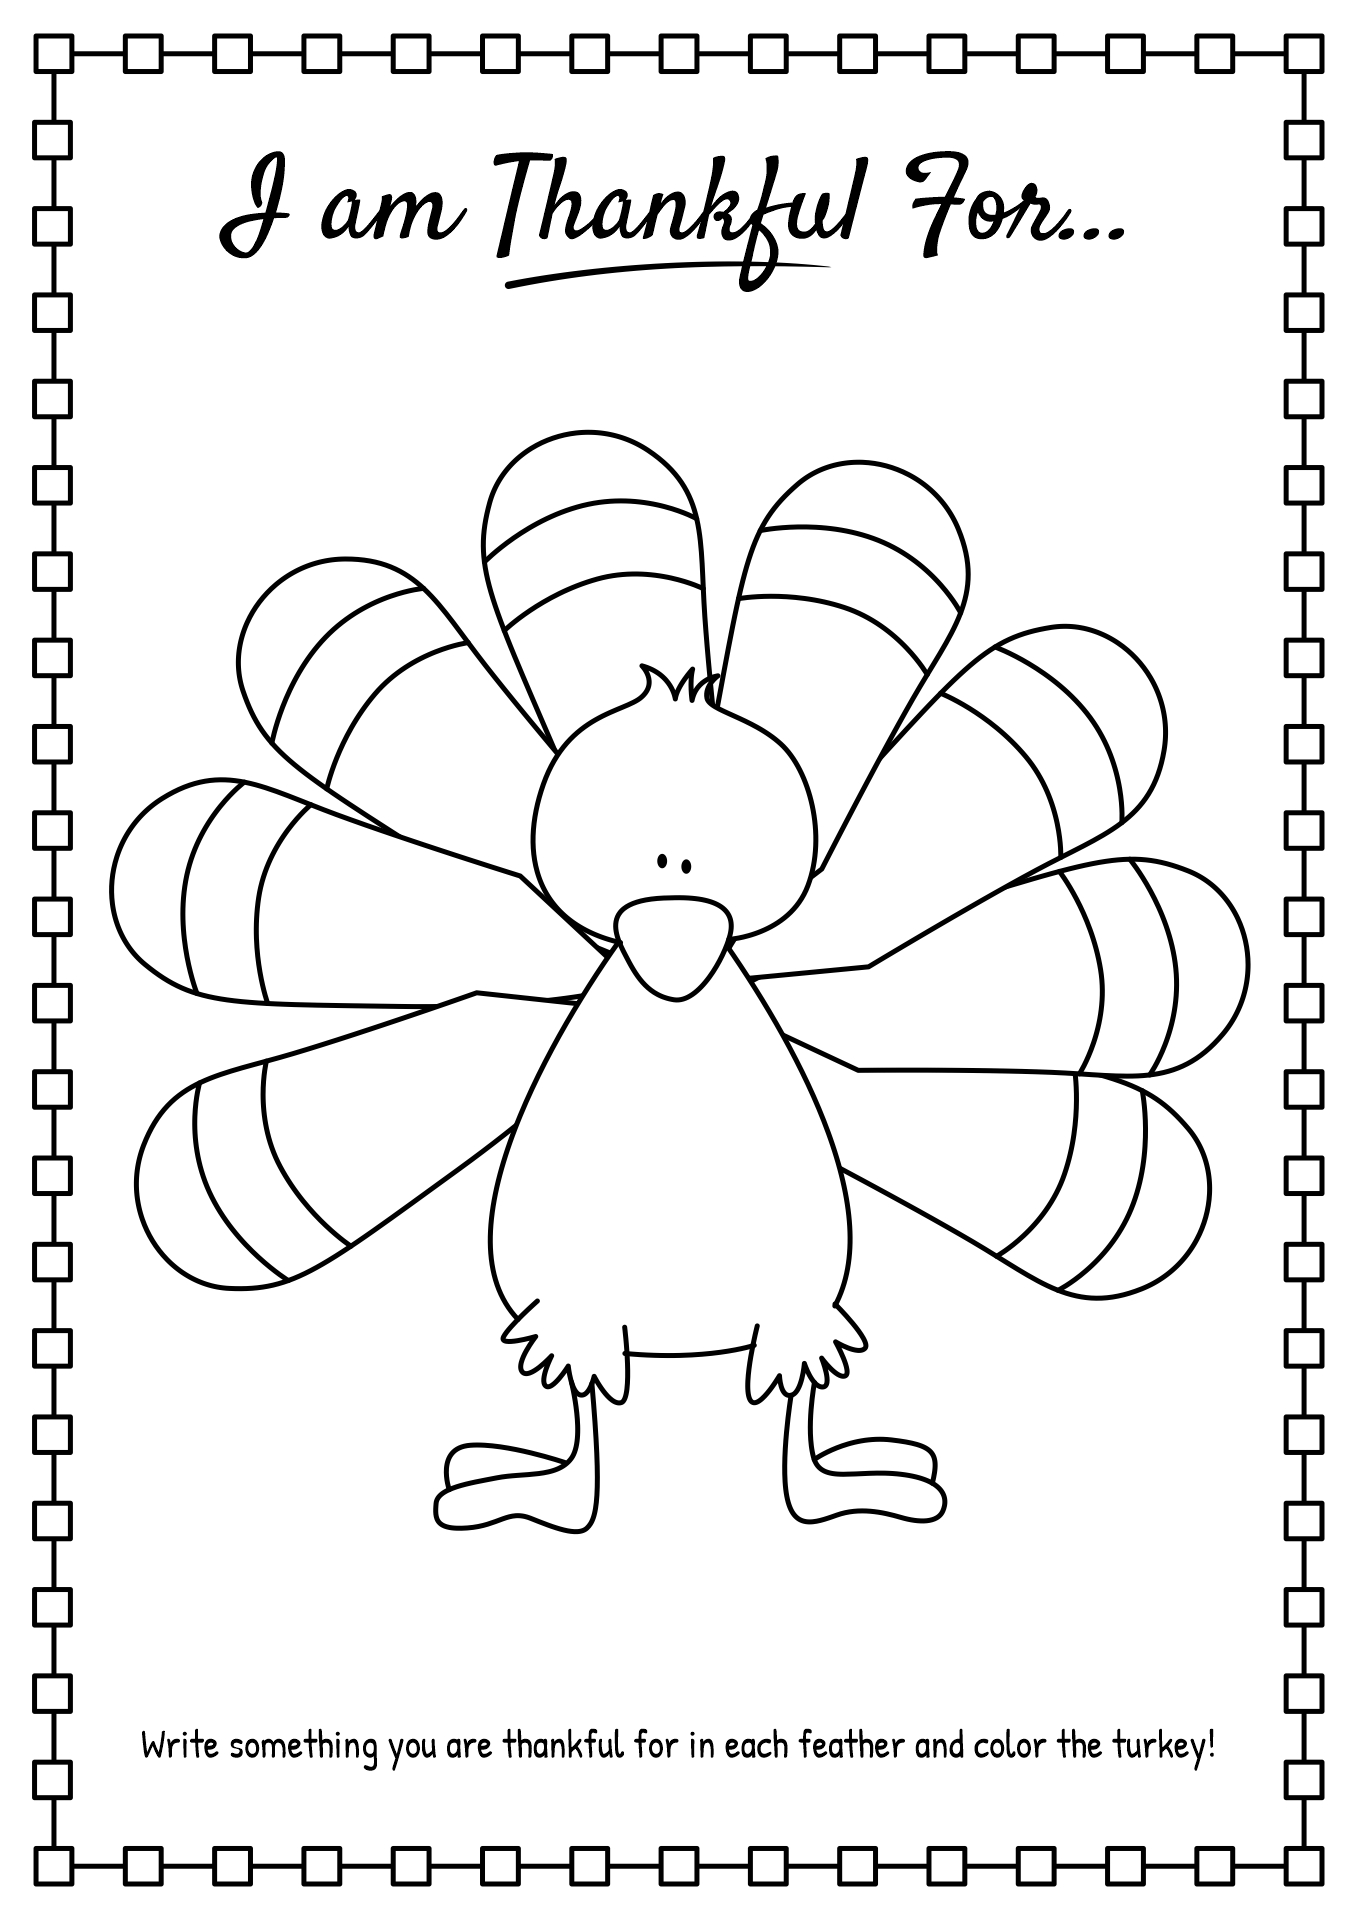 I AM Thankful for Thanksgiving Worksheets